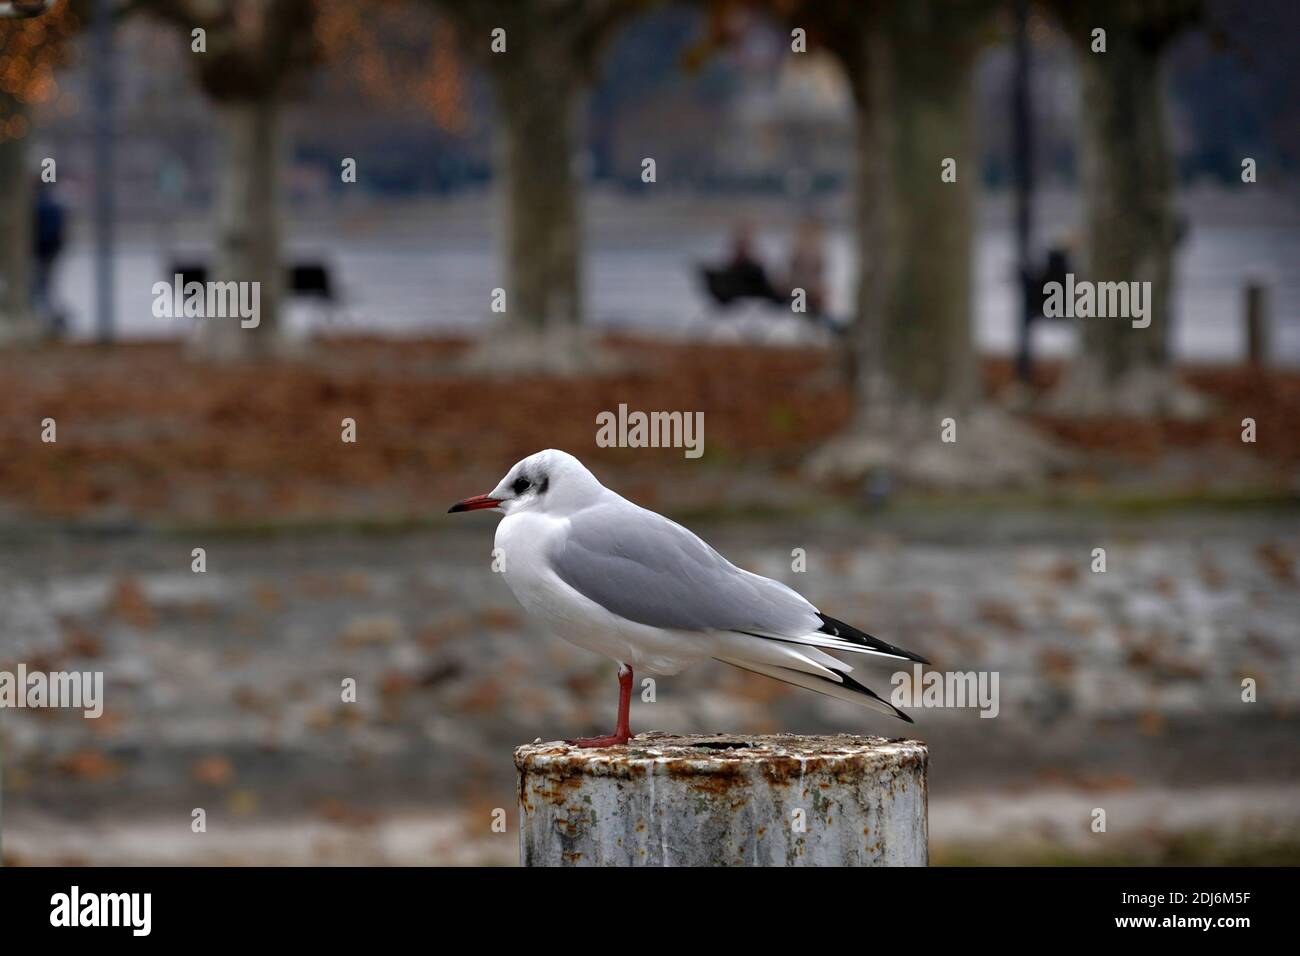 A seagull standing on a mooring pylon on the coast of Lake Constance in Germany in town Constance. There is a park in with benches in the background. Stock Photo